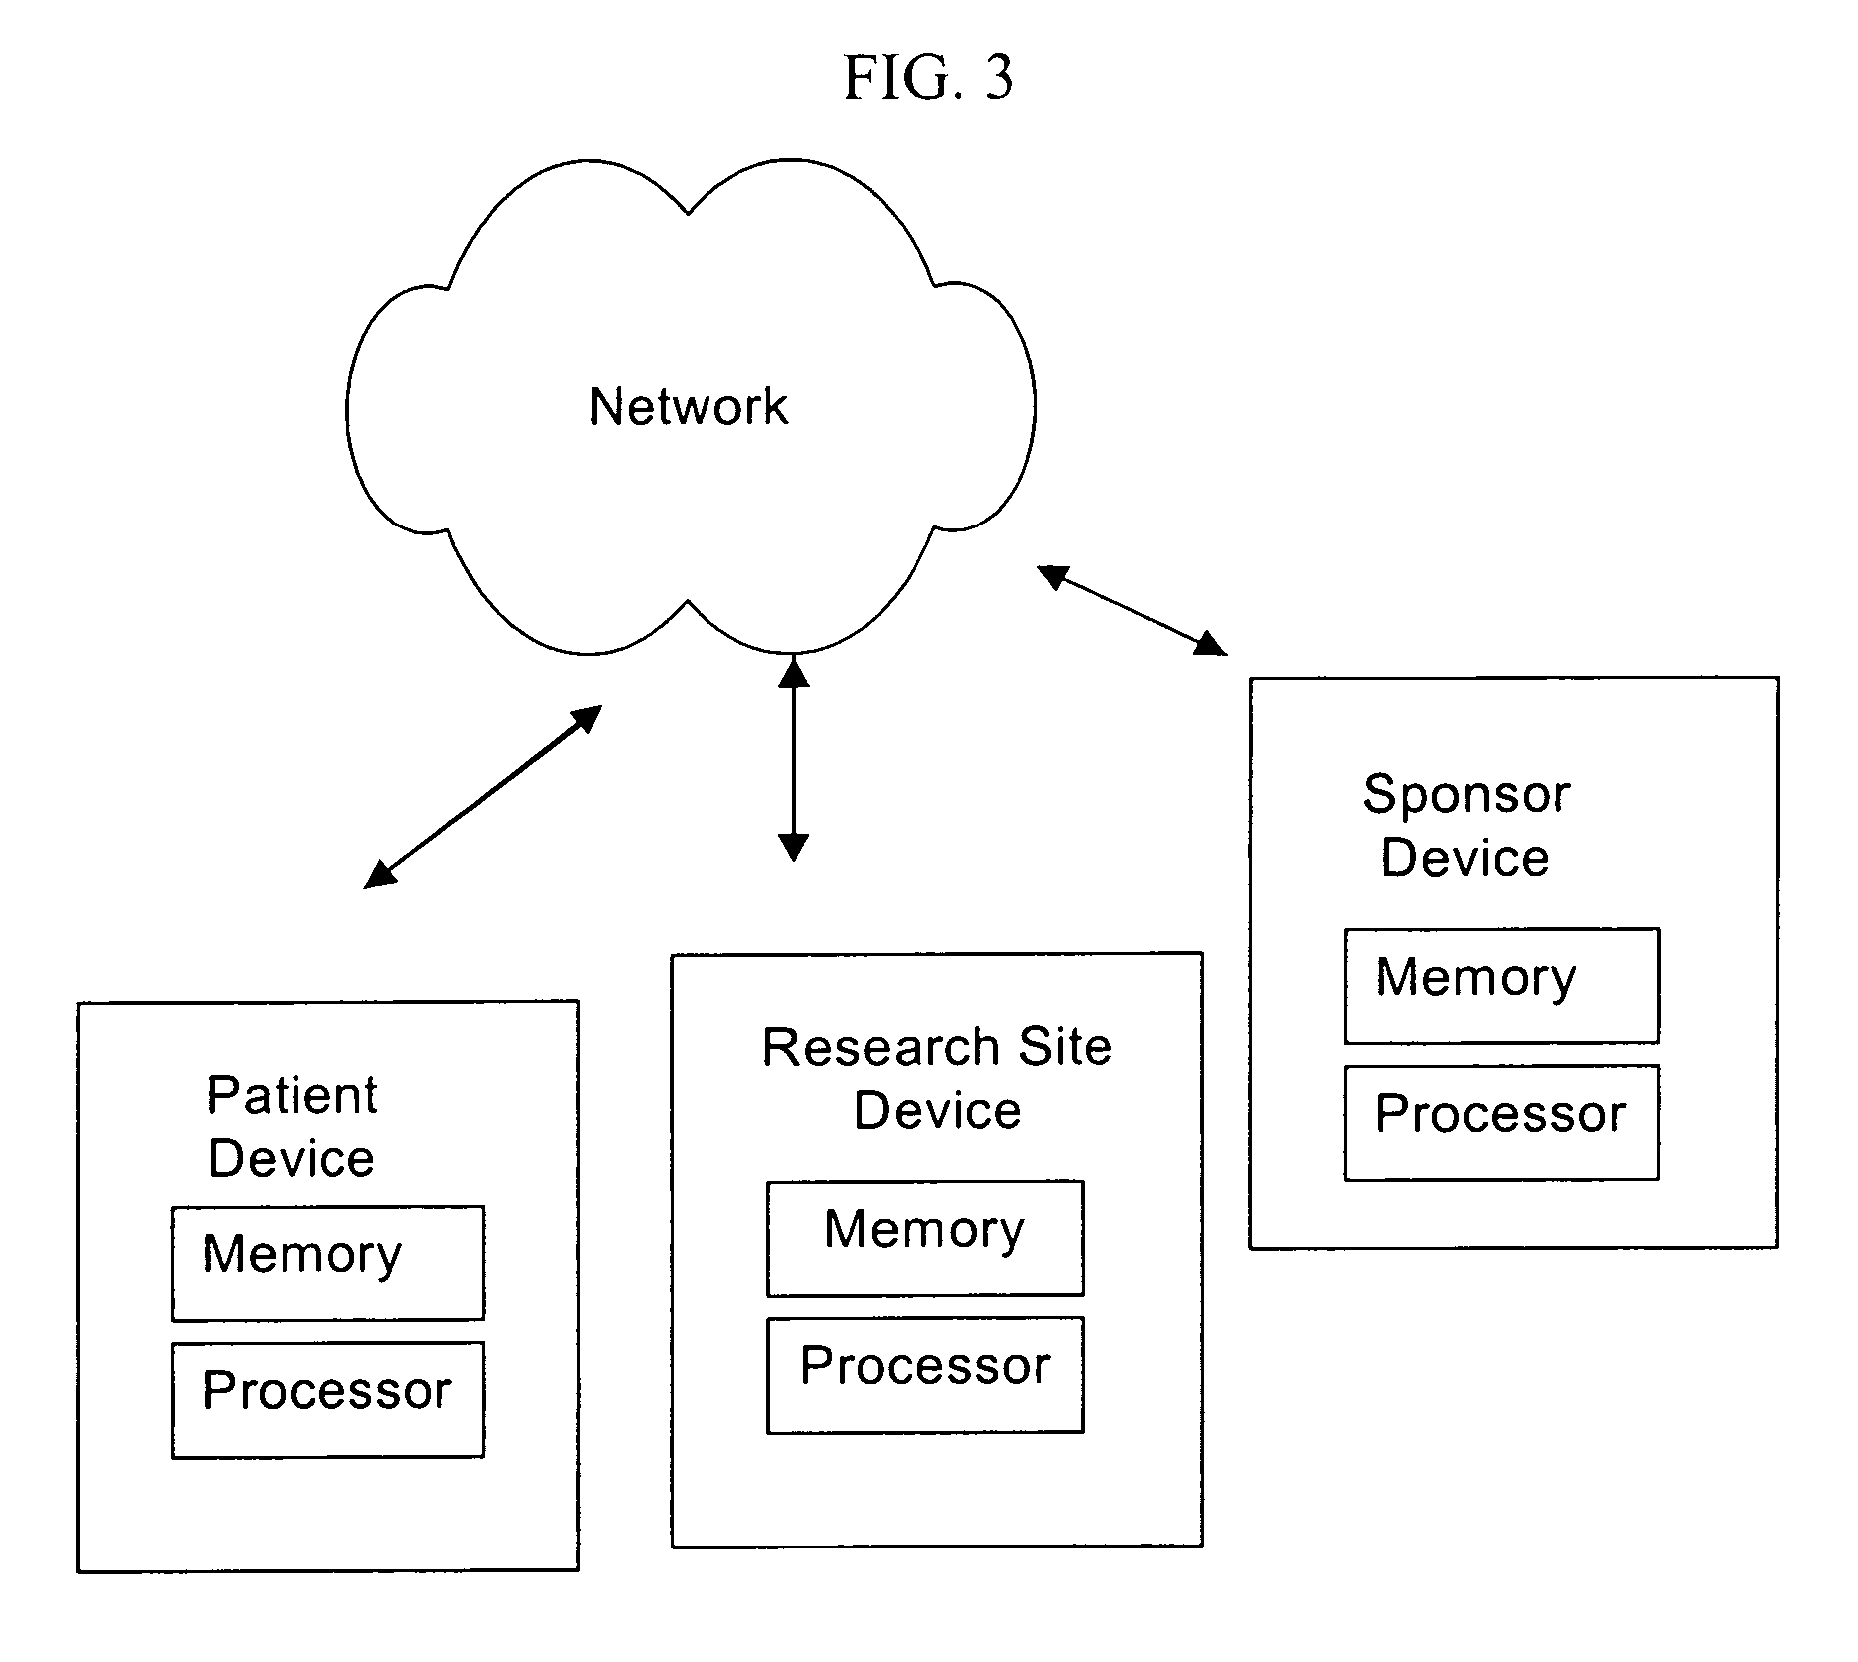 Systems and methods for scheduling and sequencing sessions or appointments